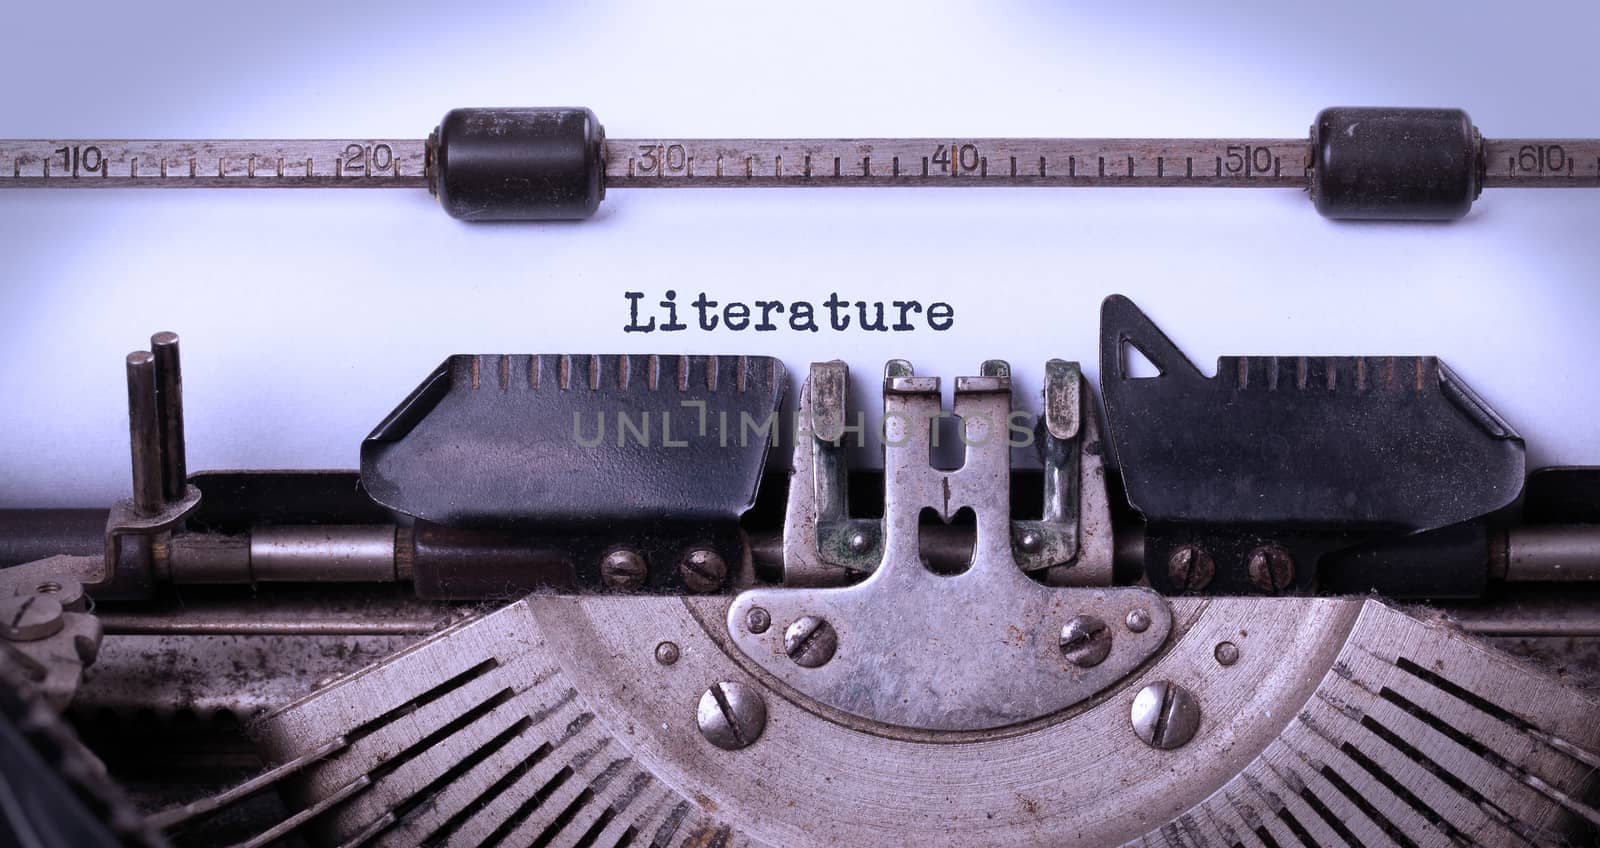 Vintage inscription made by old typewriter, literature